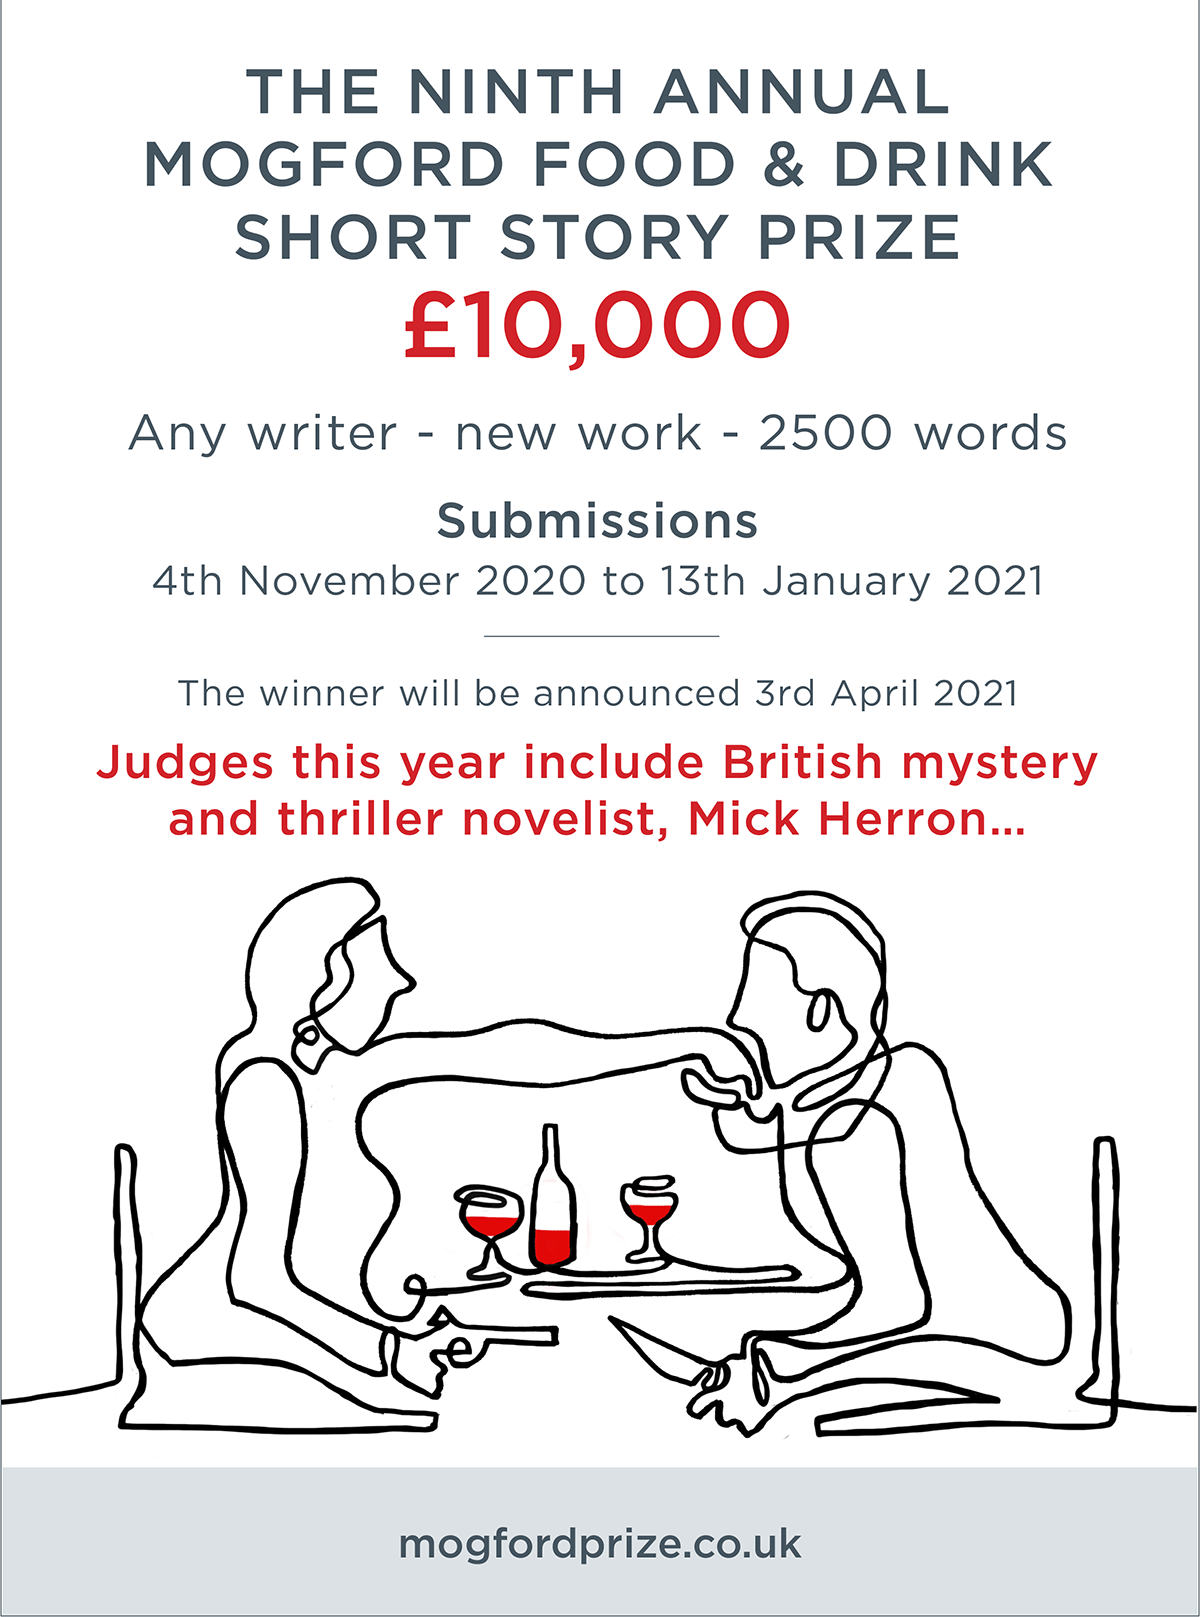 The Ninth Annual Mogford Food & Drink Short Story Prize